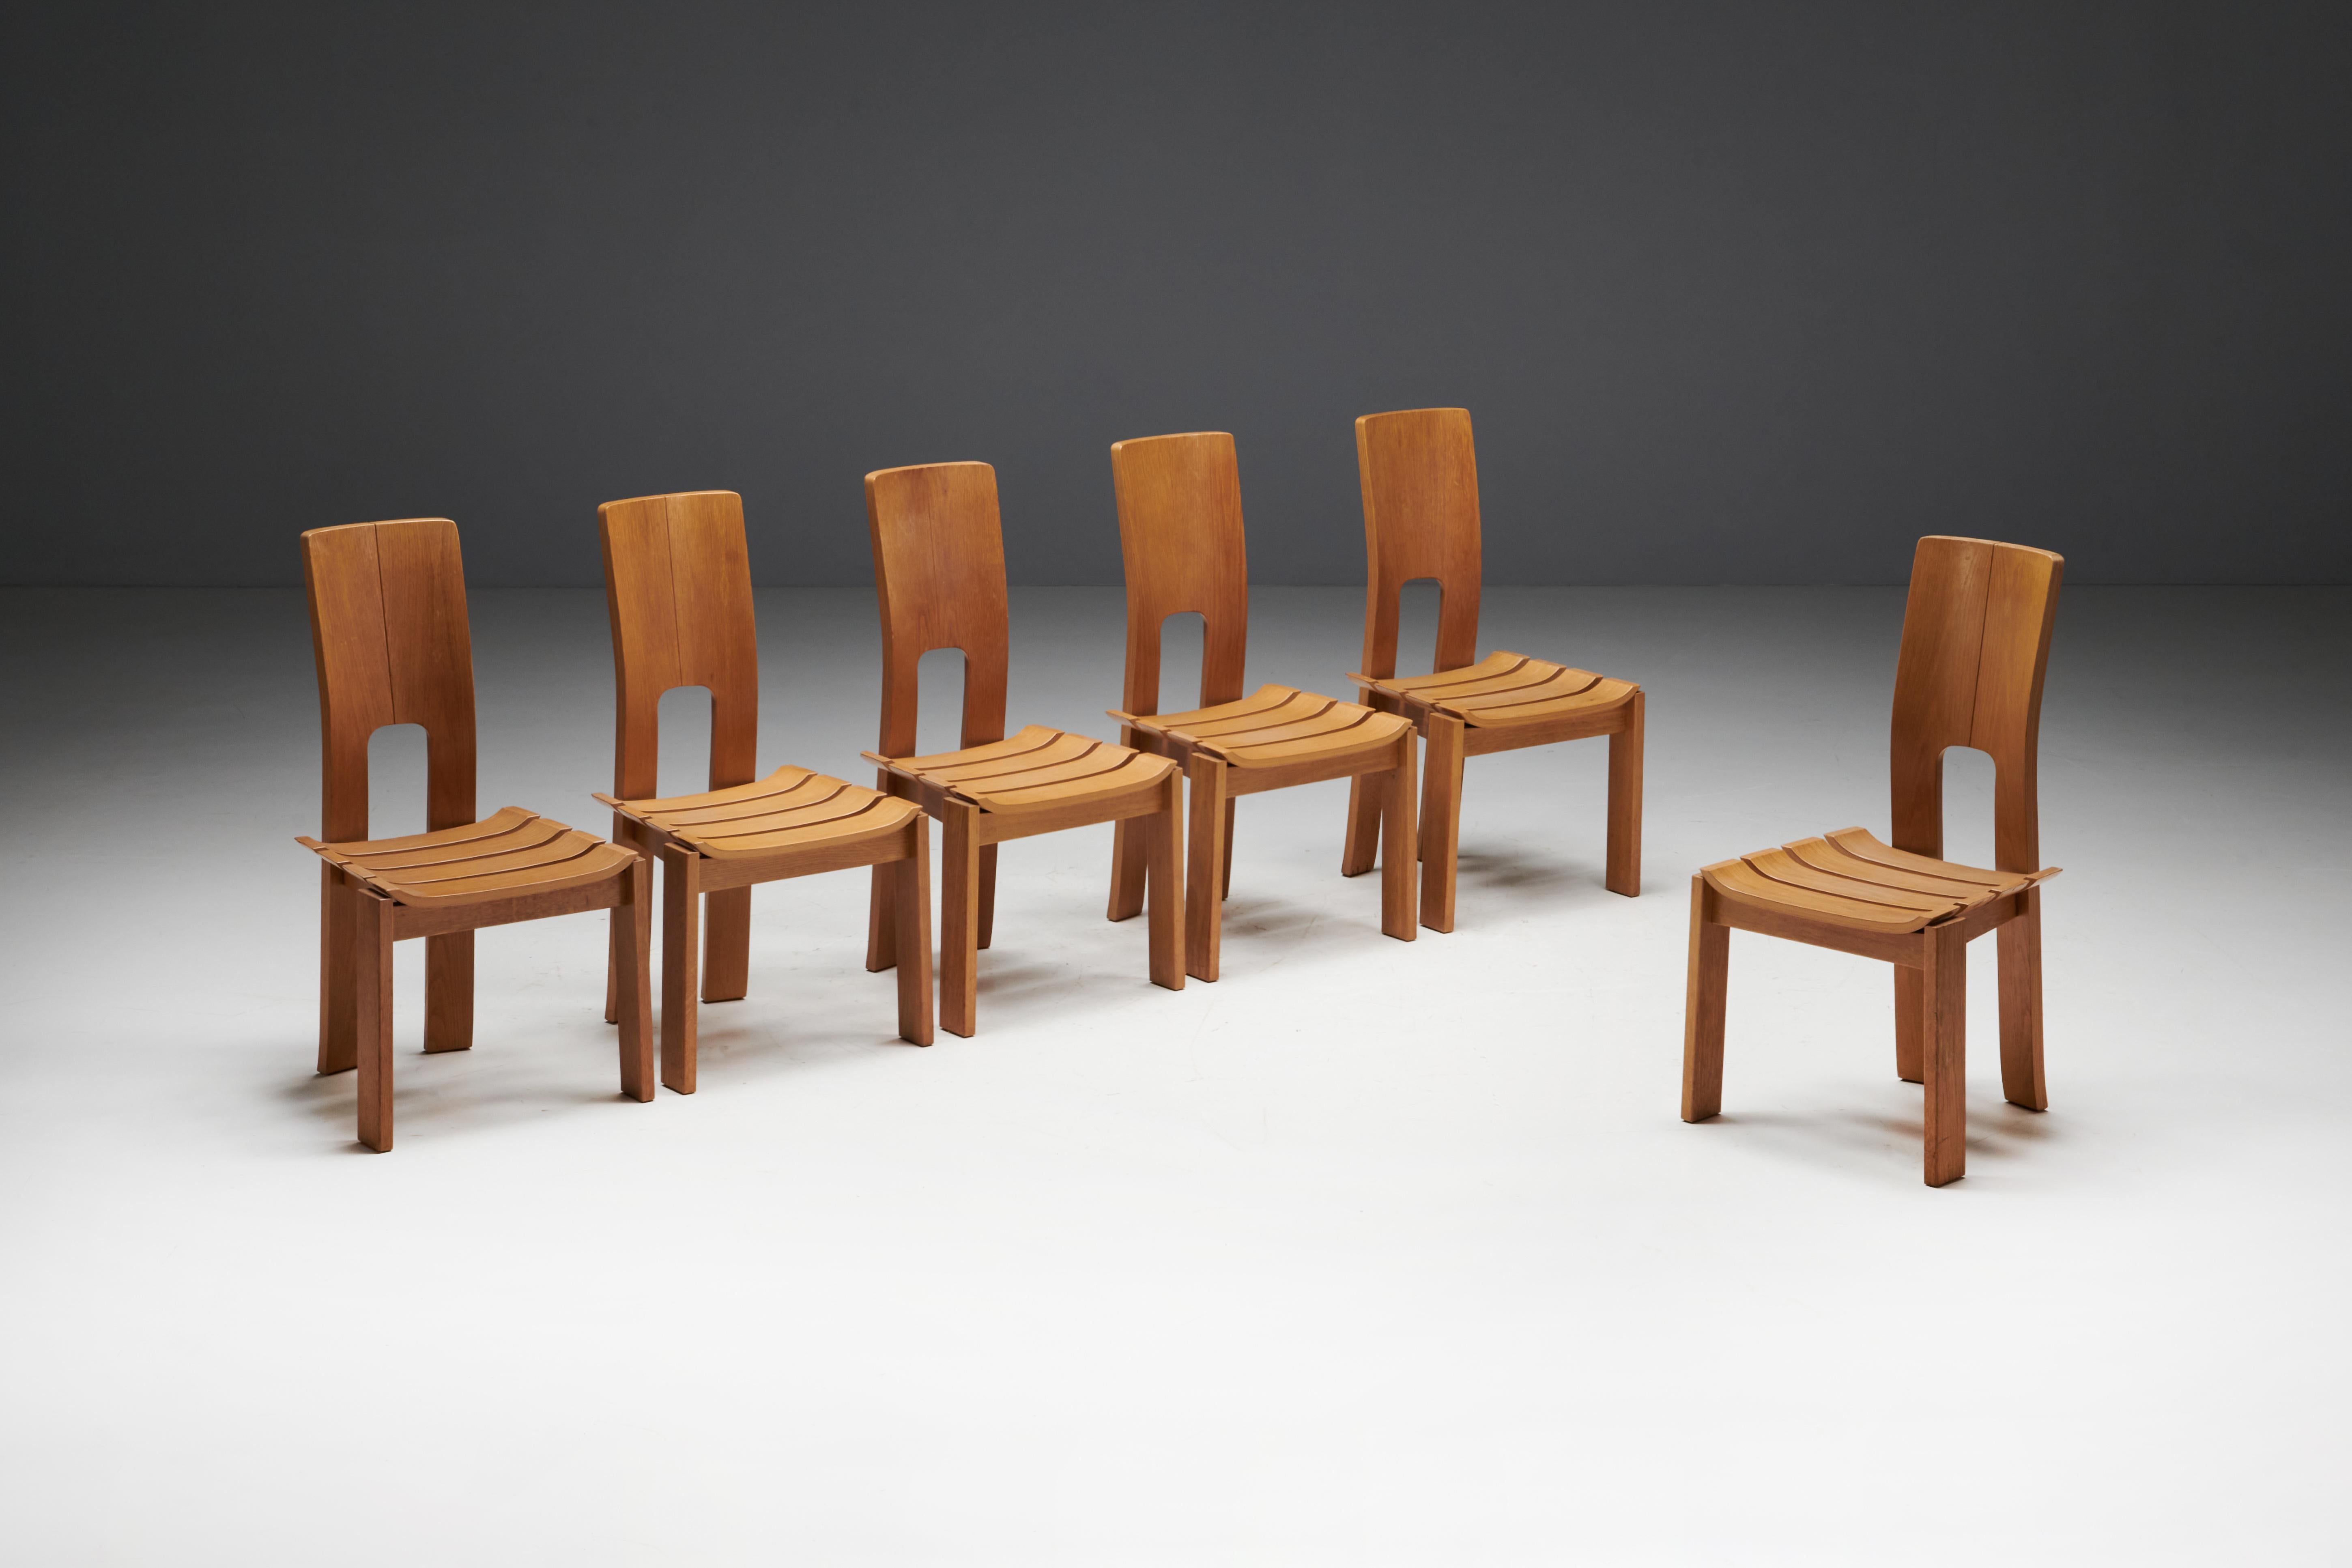 Crafted from durable beech plywood, these chairs epitomize solidity and style, offering a refined dining experience with a modern flair and distinctive character. Channeling the essence of Scandinavian design, these dining chairs present a